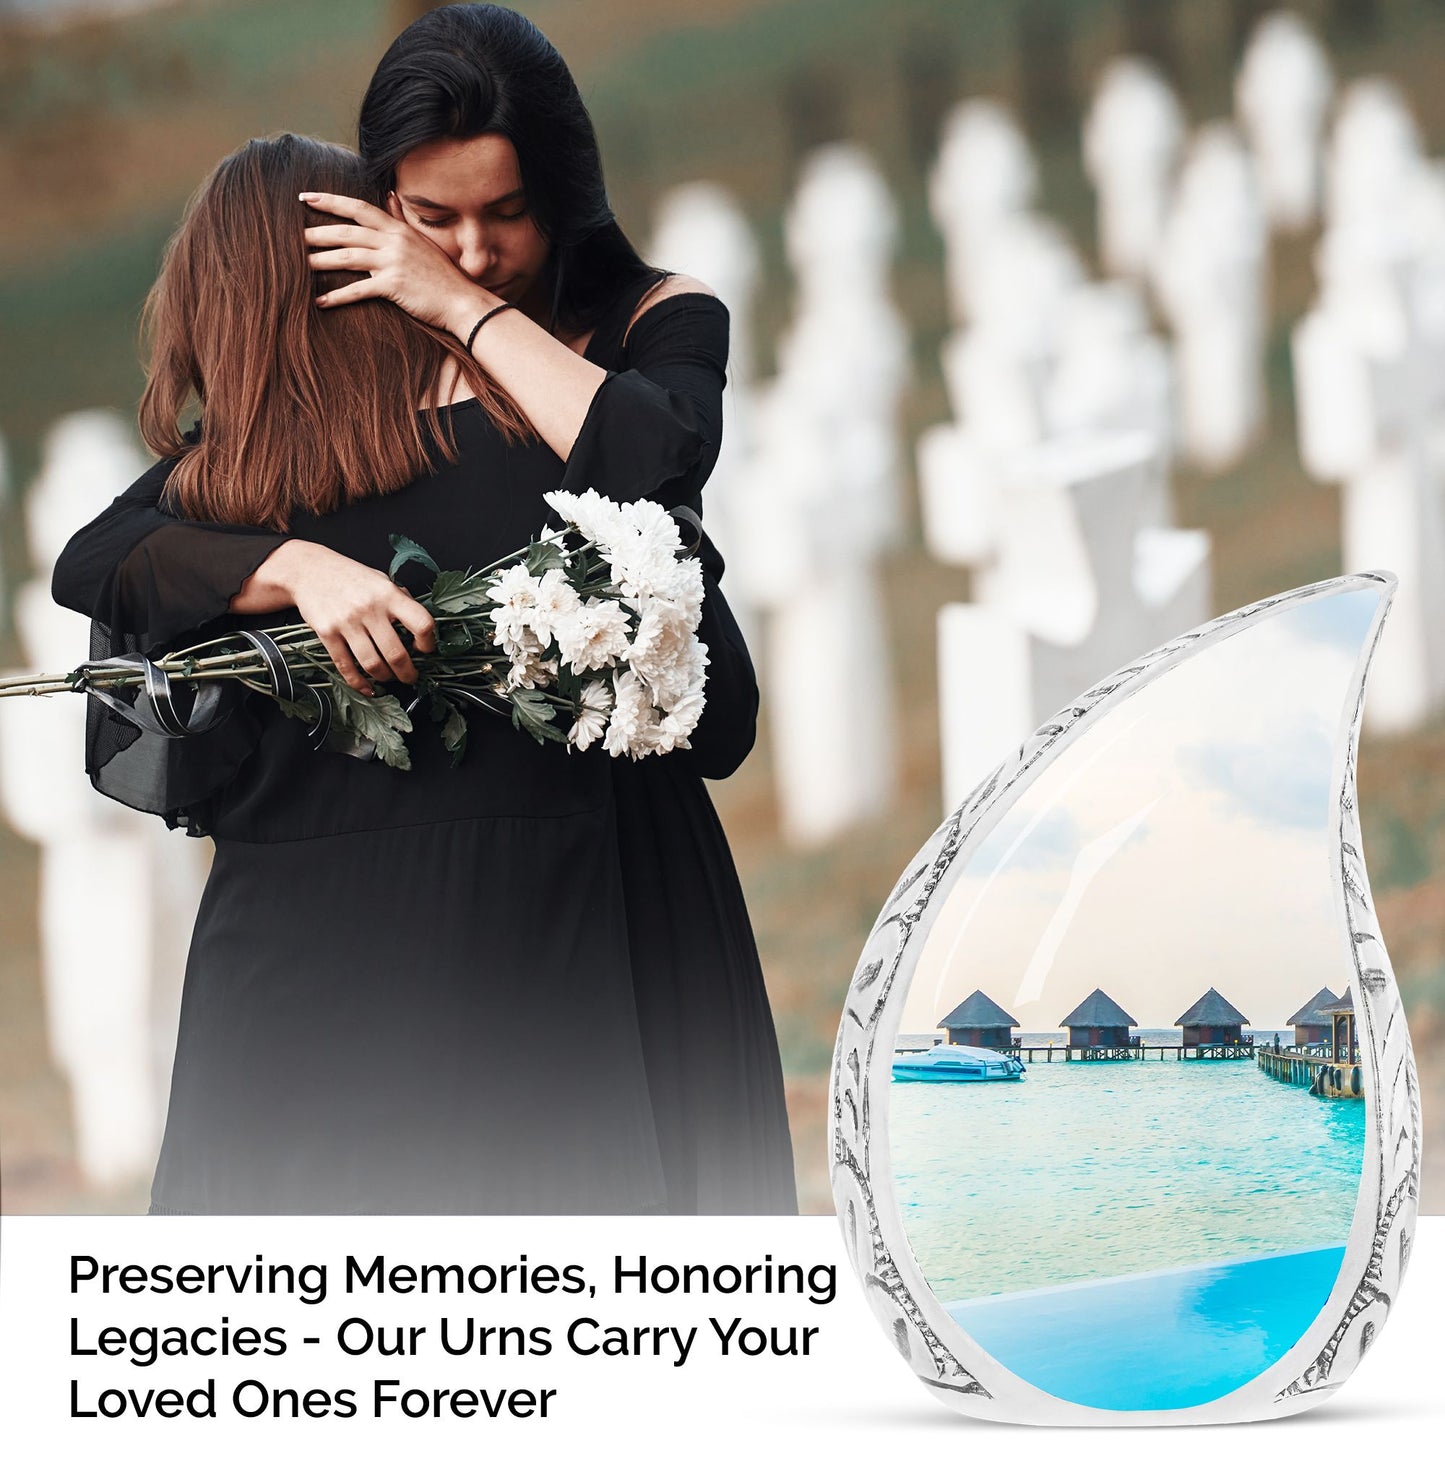 cremation urns for burial